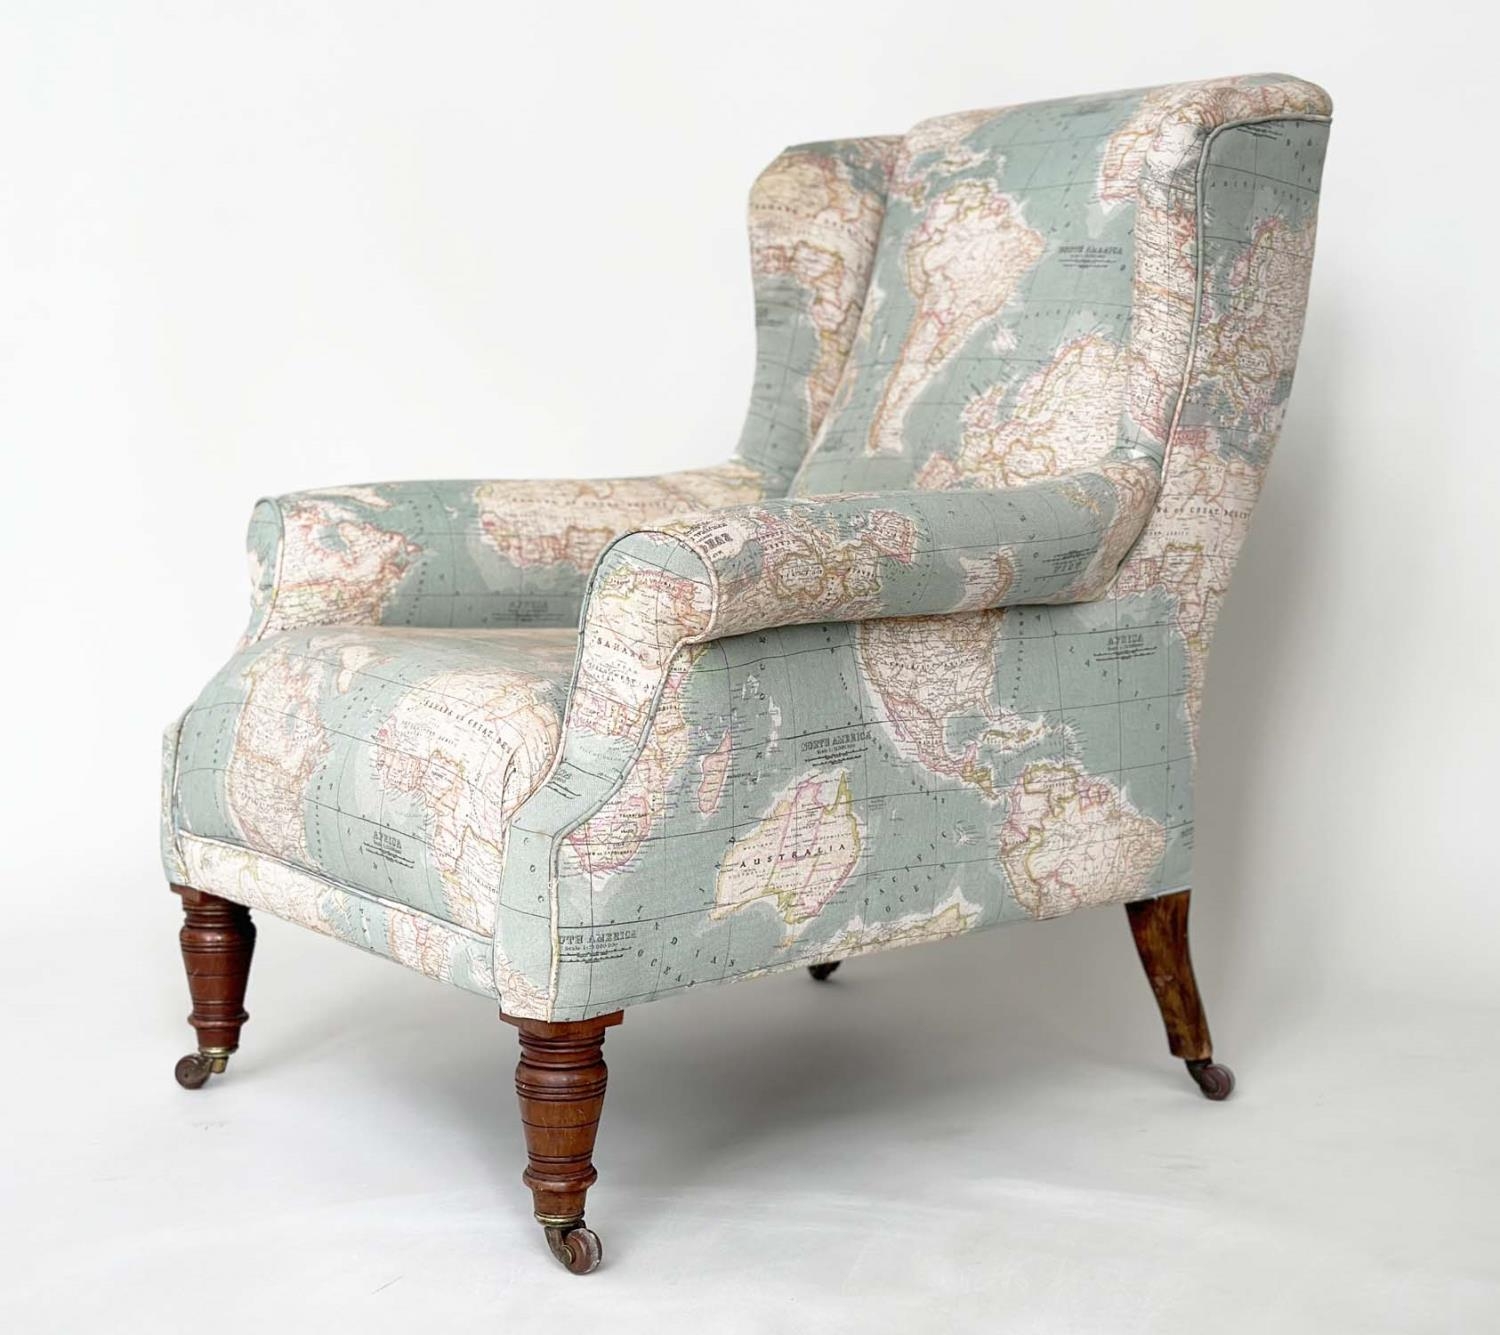 WING ARMCHAIR, Victorian walnut with circa 1900 World Atlas printed fabric upholstery scroll arms - Image 5 of 12